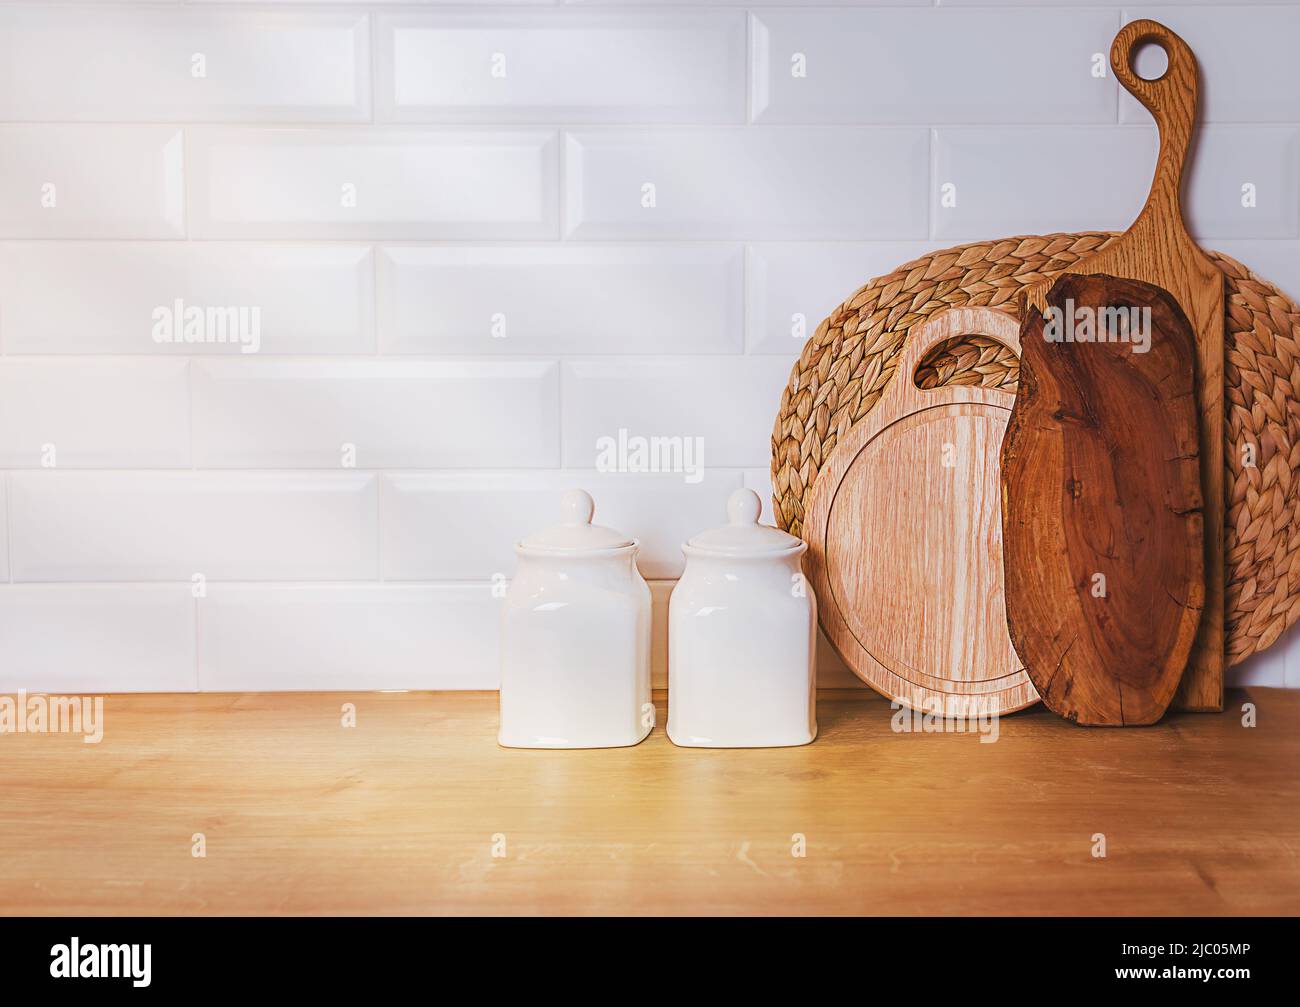 kitchen template, mockup. Vintage image of kitchen with white wall and wooden boards Stock Photo